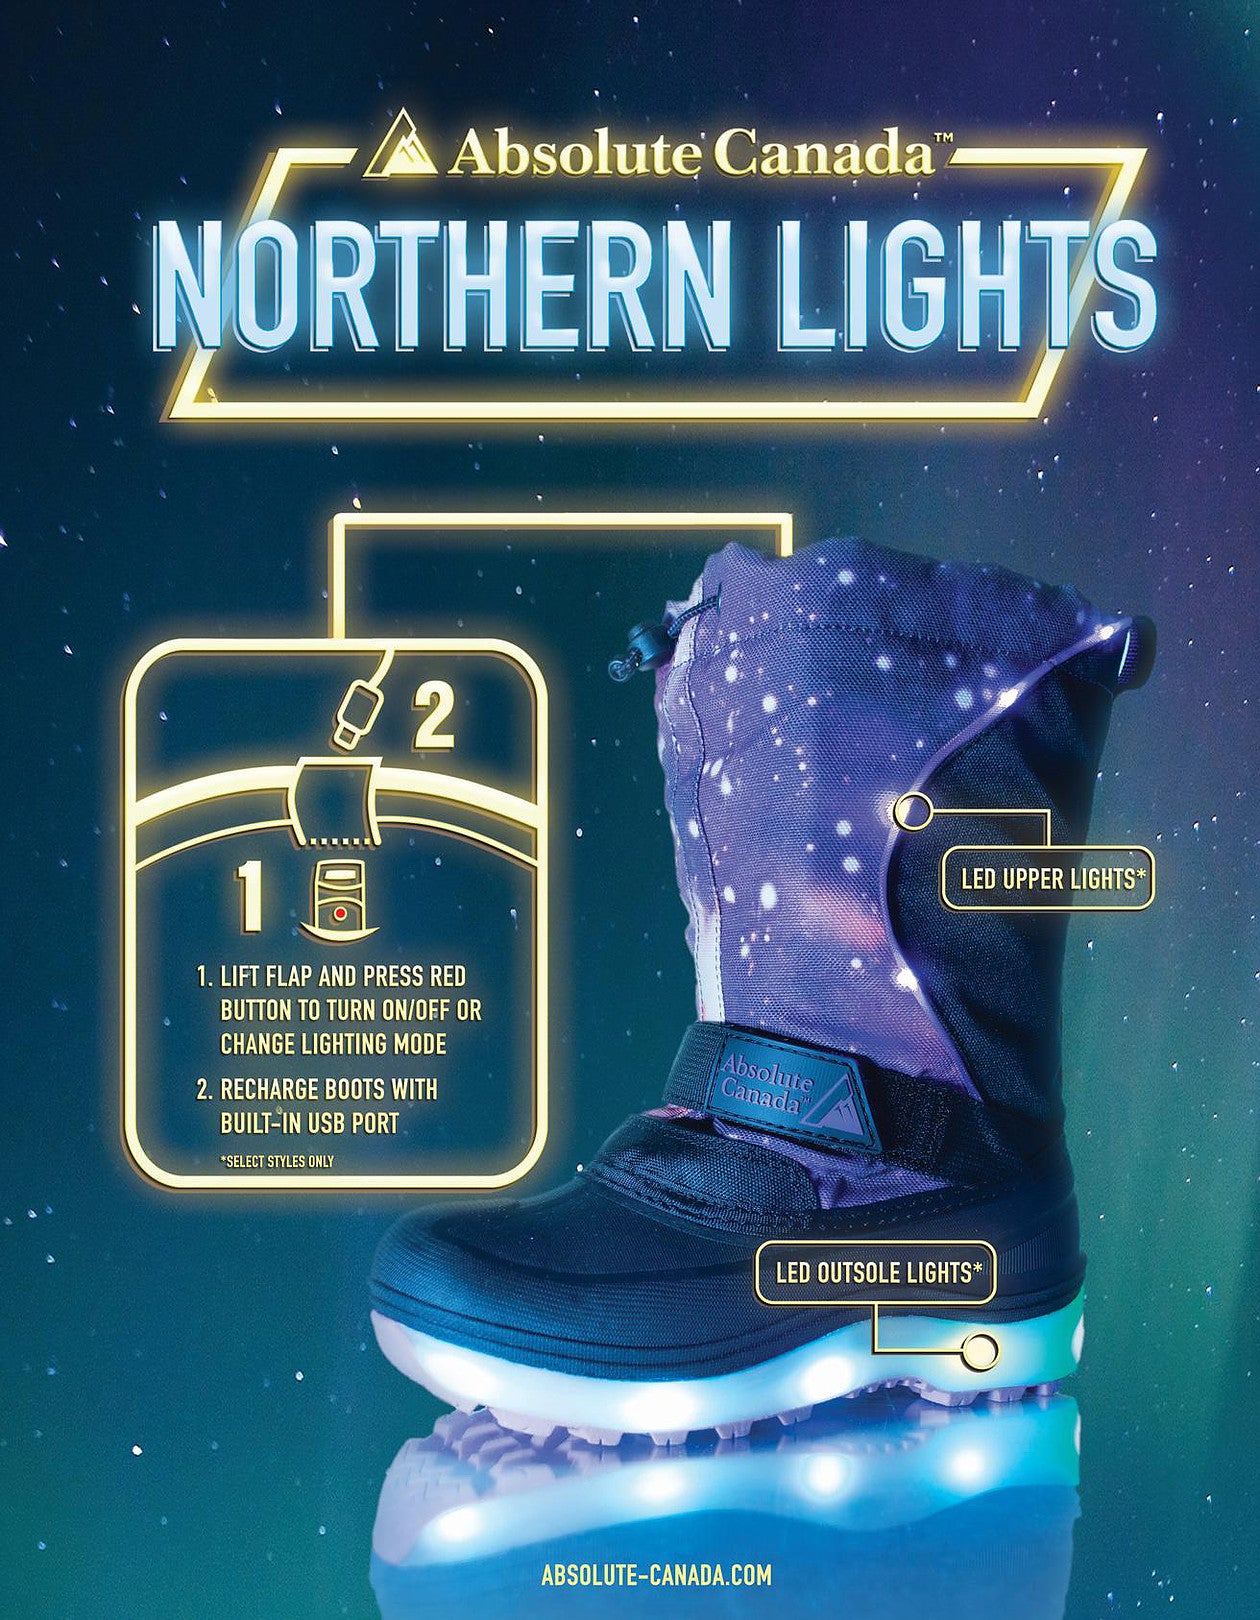 How To Operate The LED Lights In Your Boots – Absolute